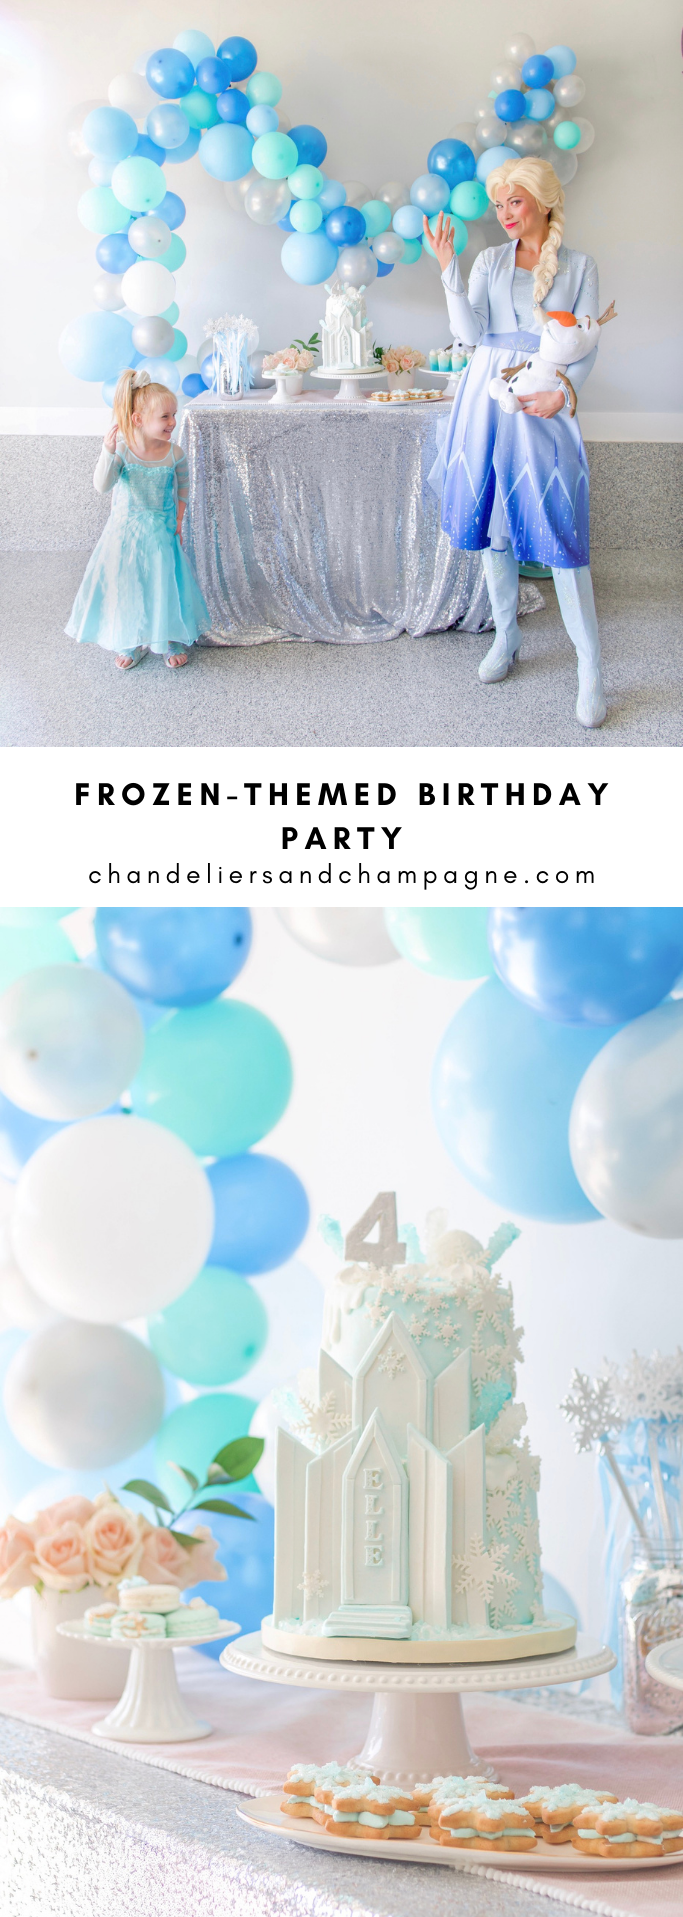 Frozen themed birthday party with ice castle cake and Else performer